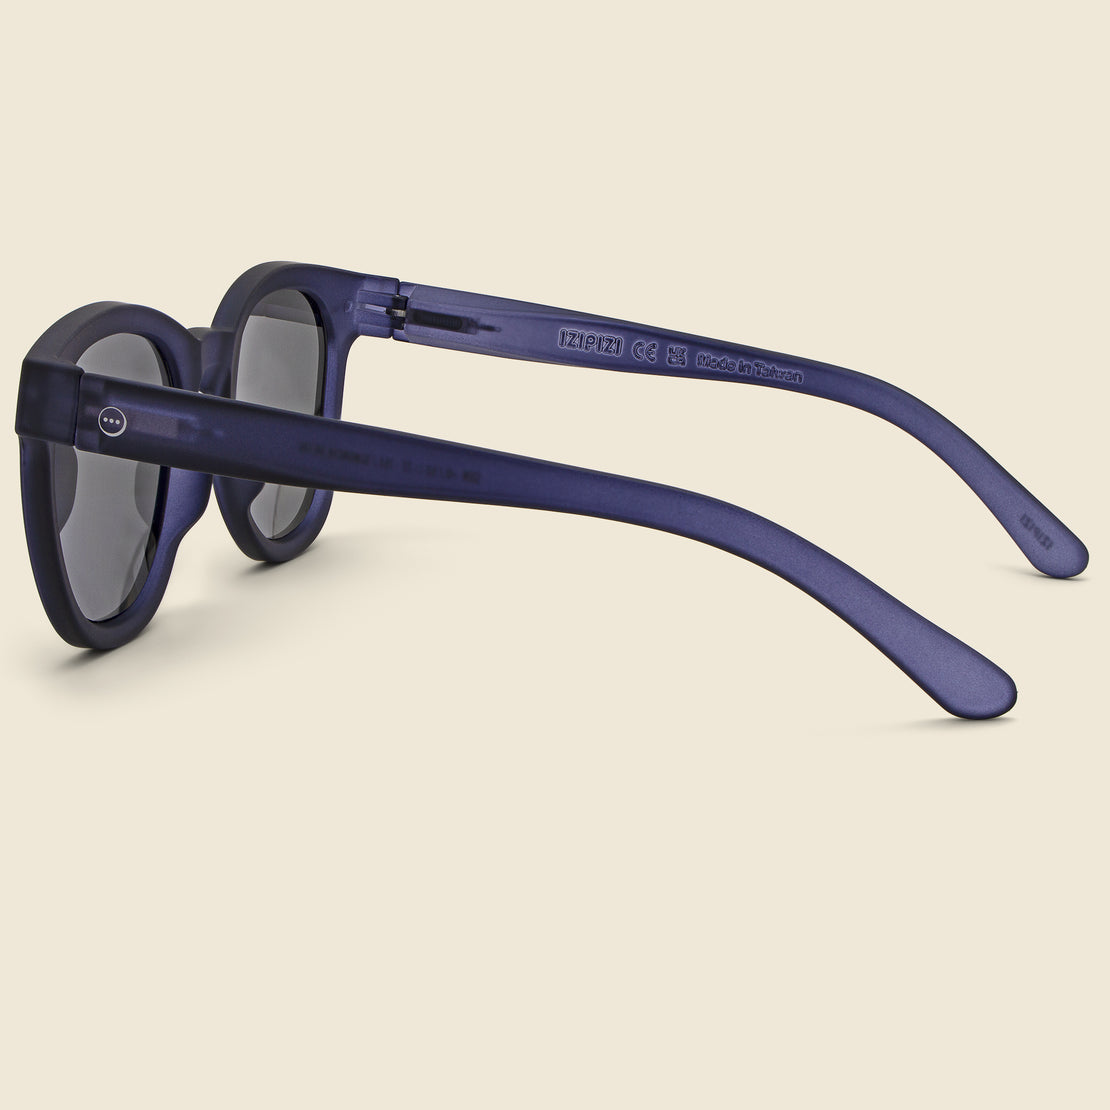 The Trapeze Oversize #N - Midnight Blue - Izipizi - STAG Provisions - Accessories - Eyewear